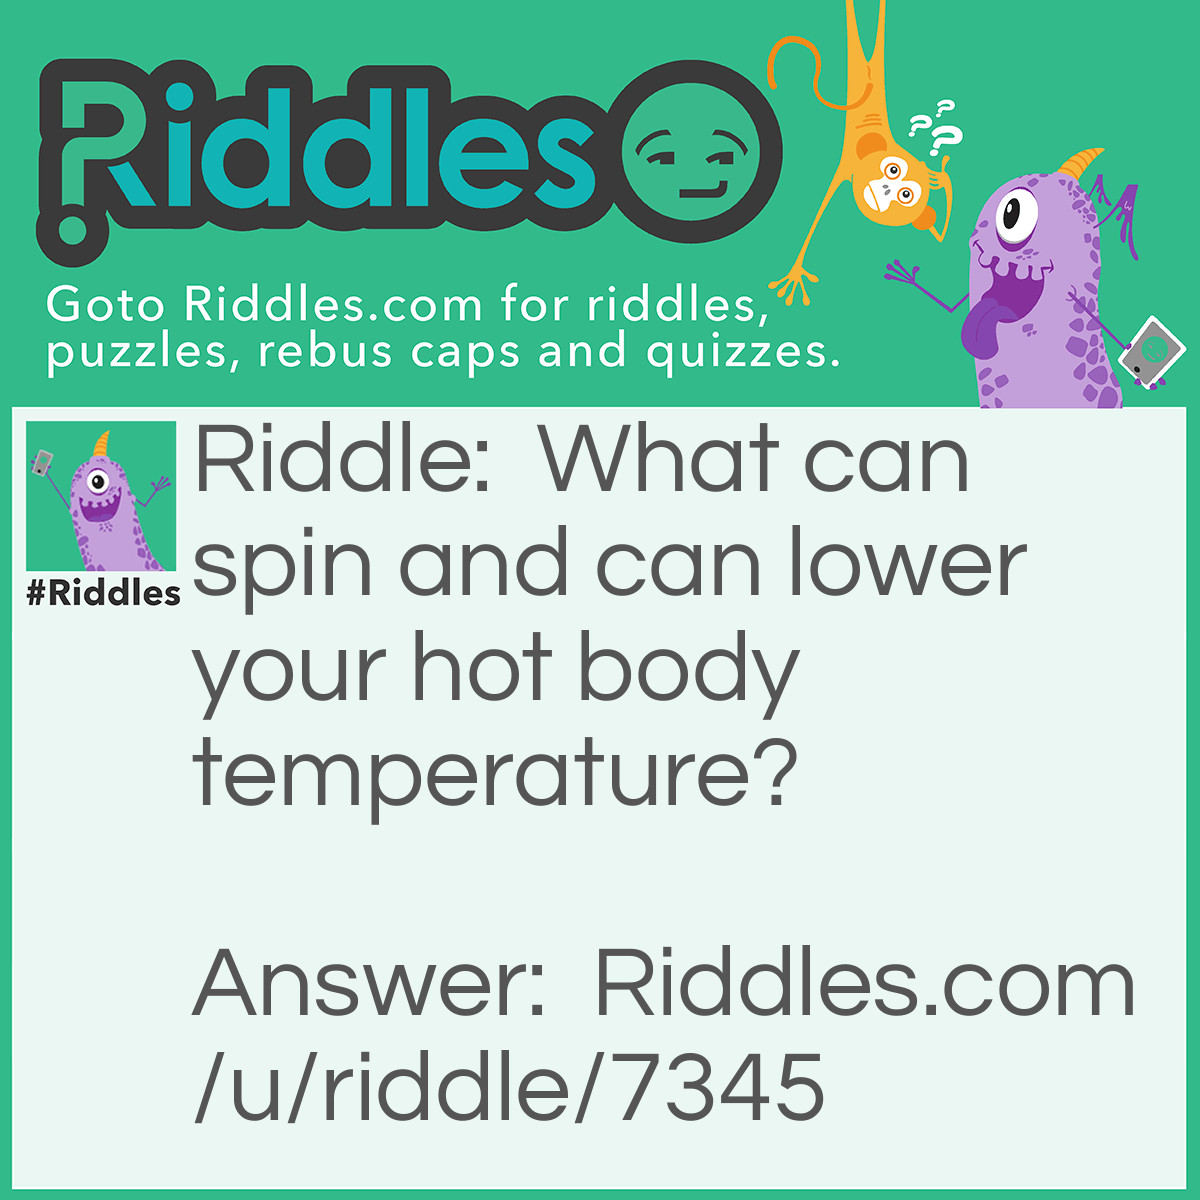 Riddle: What can spin and can lower your hot body temperature? Answer: A Fan.